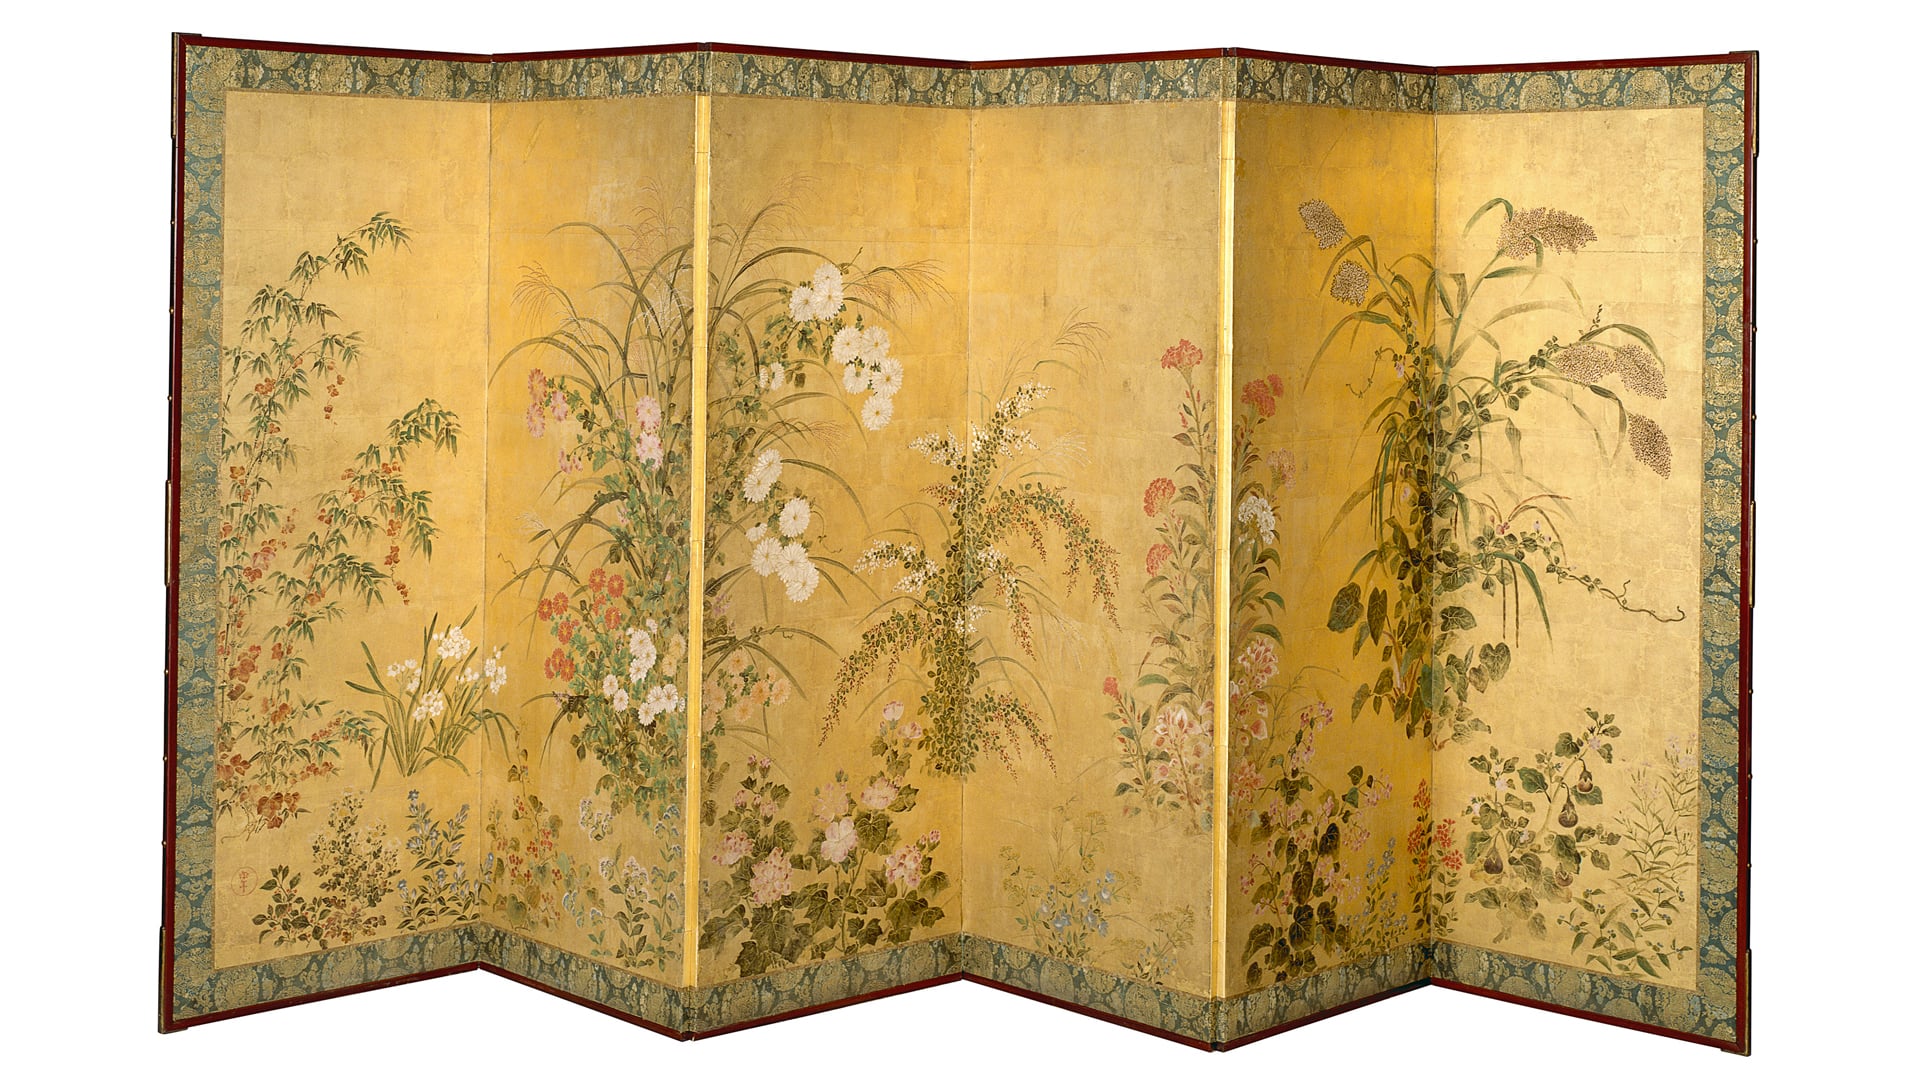 Tawaraya SŌTATSU (school of)<br /> <em>Flowering plants of the four seasons</em> (c. 1630-1640)<br /> (Shikisōka zu 四季草花図)<br /> six panel folding screen: ink and pigments on gold leaf on paper, silk, lacquer on wood, paper, metal<br /> 150.4 x 364.2 cm (image and sheet)<br /> National Gallery of Victoria, Melbourne<br /> Felton Bequest, 1907